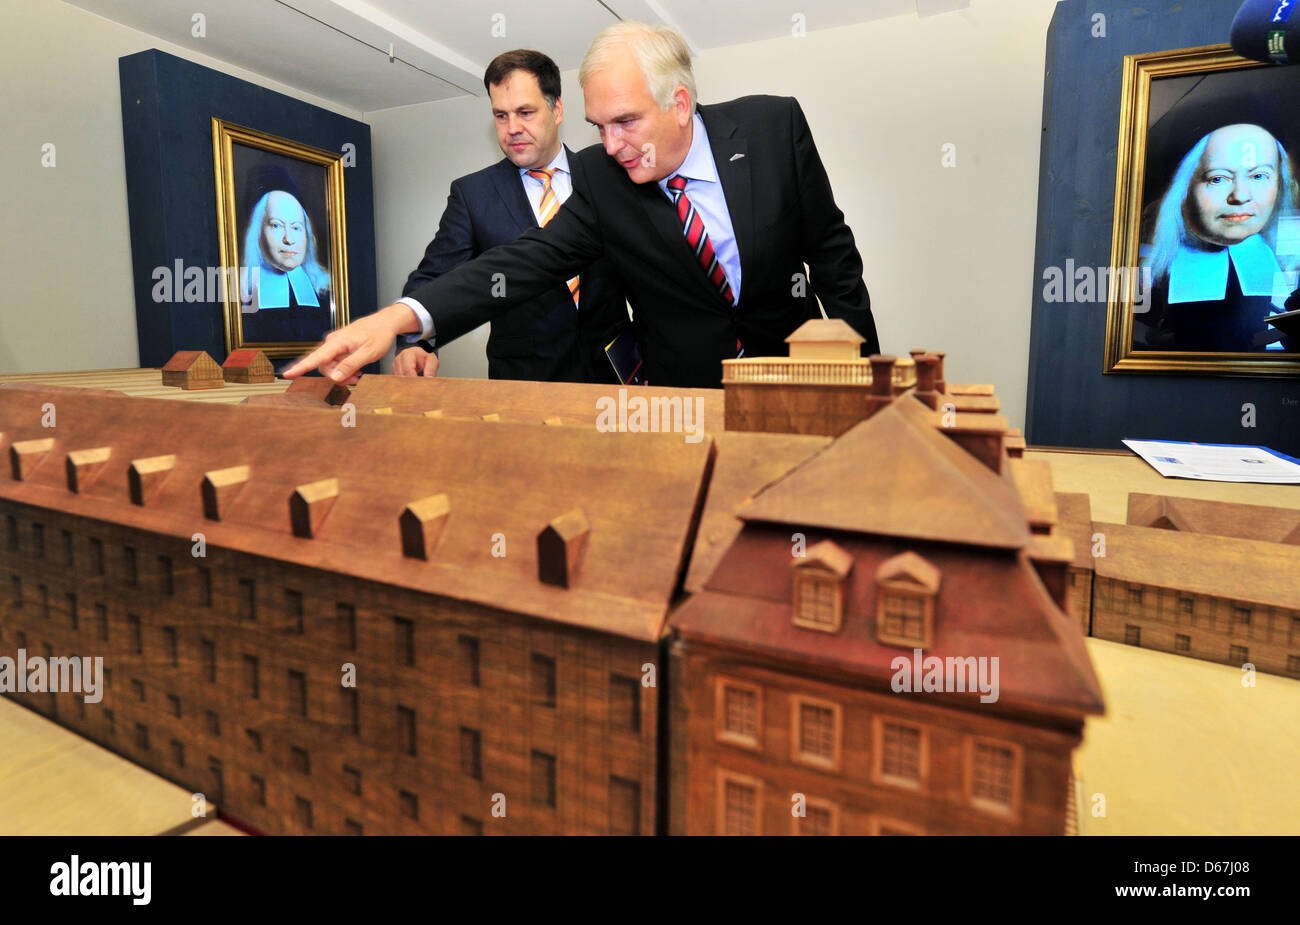 Minister of Culture of Saxony-Anhalt Stephan Dorgeloh (SPD, L) and Director of the Francke Foundations Thomas Mueller-Bahlke view a model of the buildings of the Francke Foundations at the former home of August Hermann Francke in Halle/Saale, Germany, 11 June 2012. The foundation will honour the 350th anniversary of their founder August Hermann Francke (1663-1727) with an extensive Stock Photo